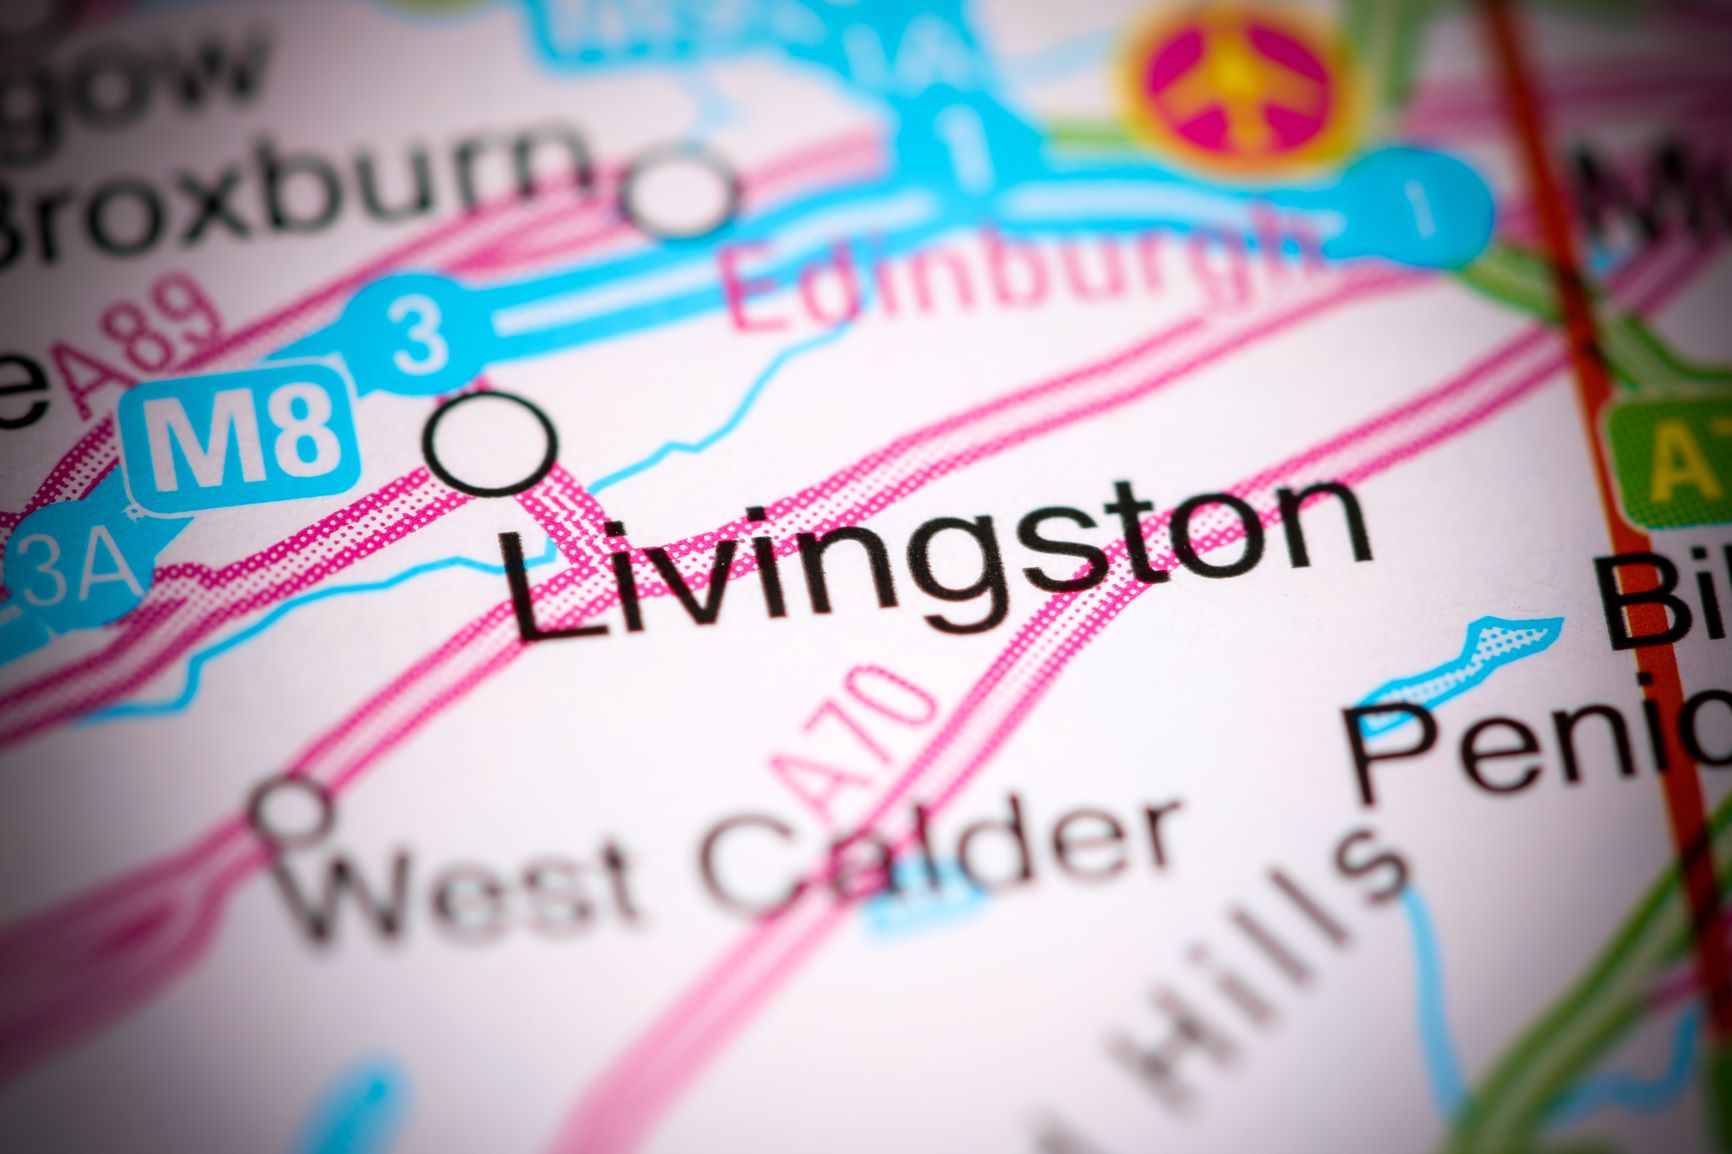 Livingston on a map